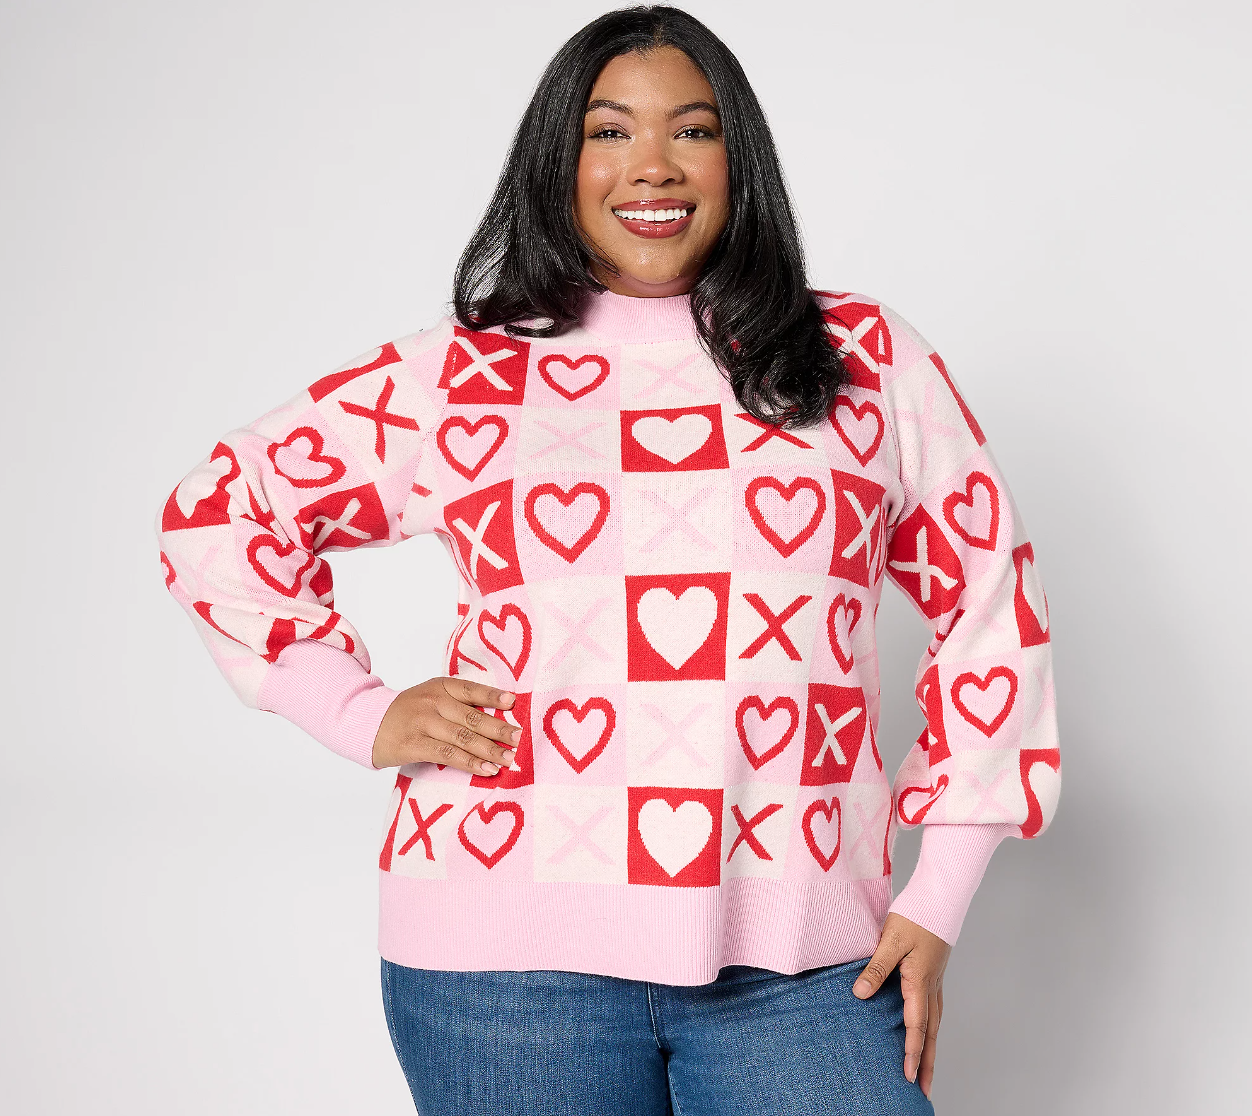 7 Galentine's Gifts To Spread The Love To All Your Gal Pals – InspireMore